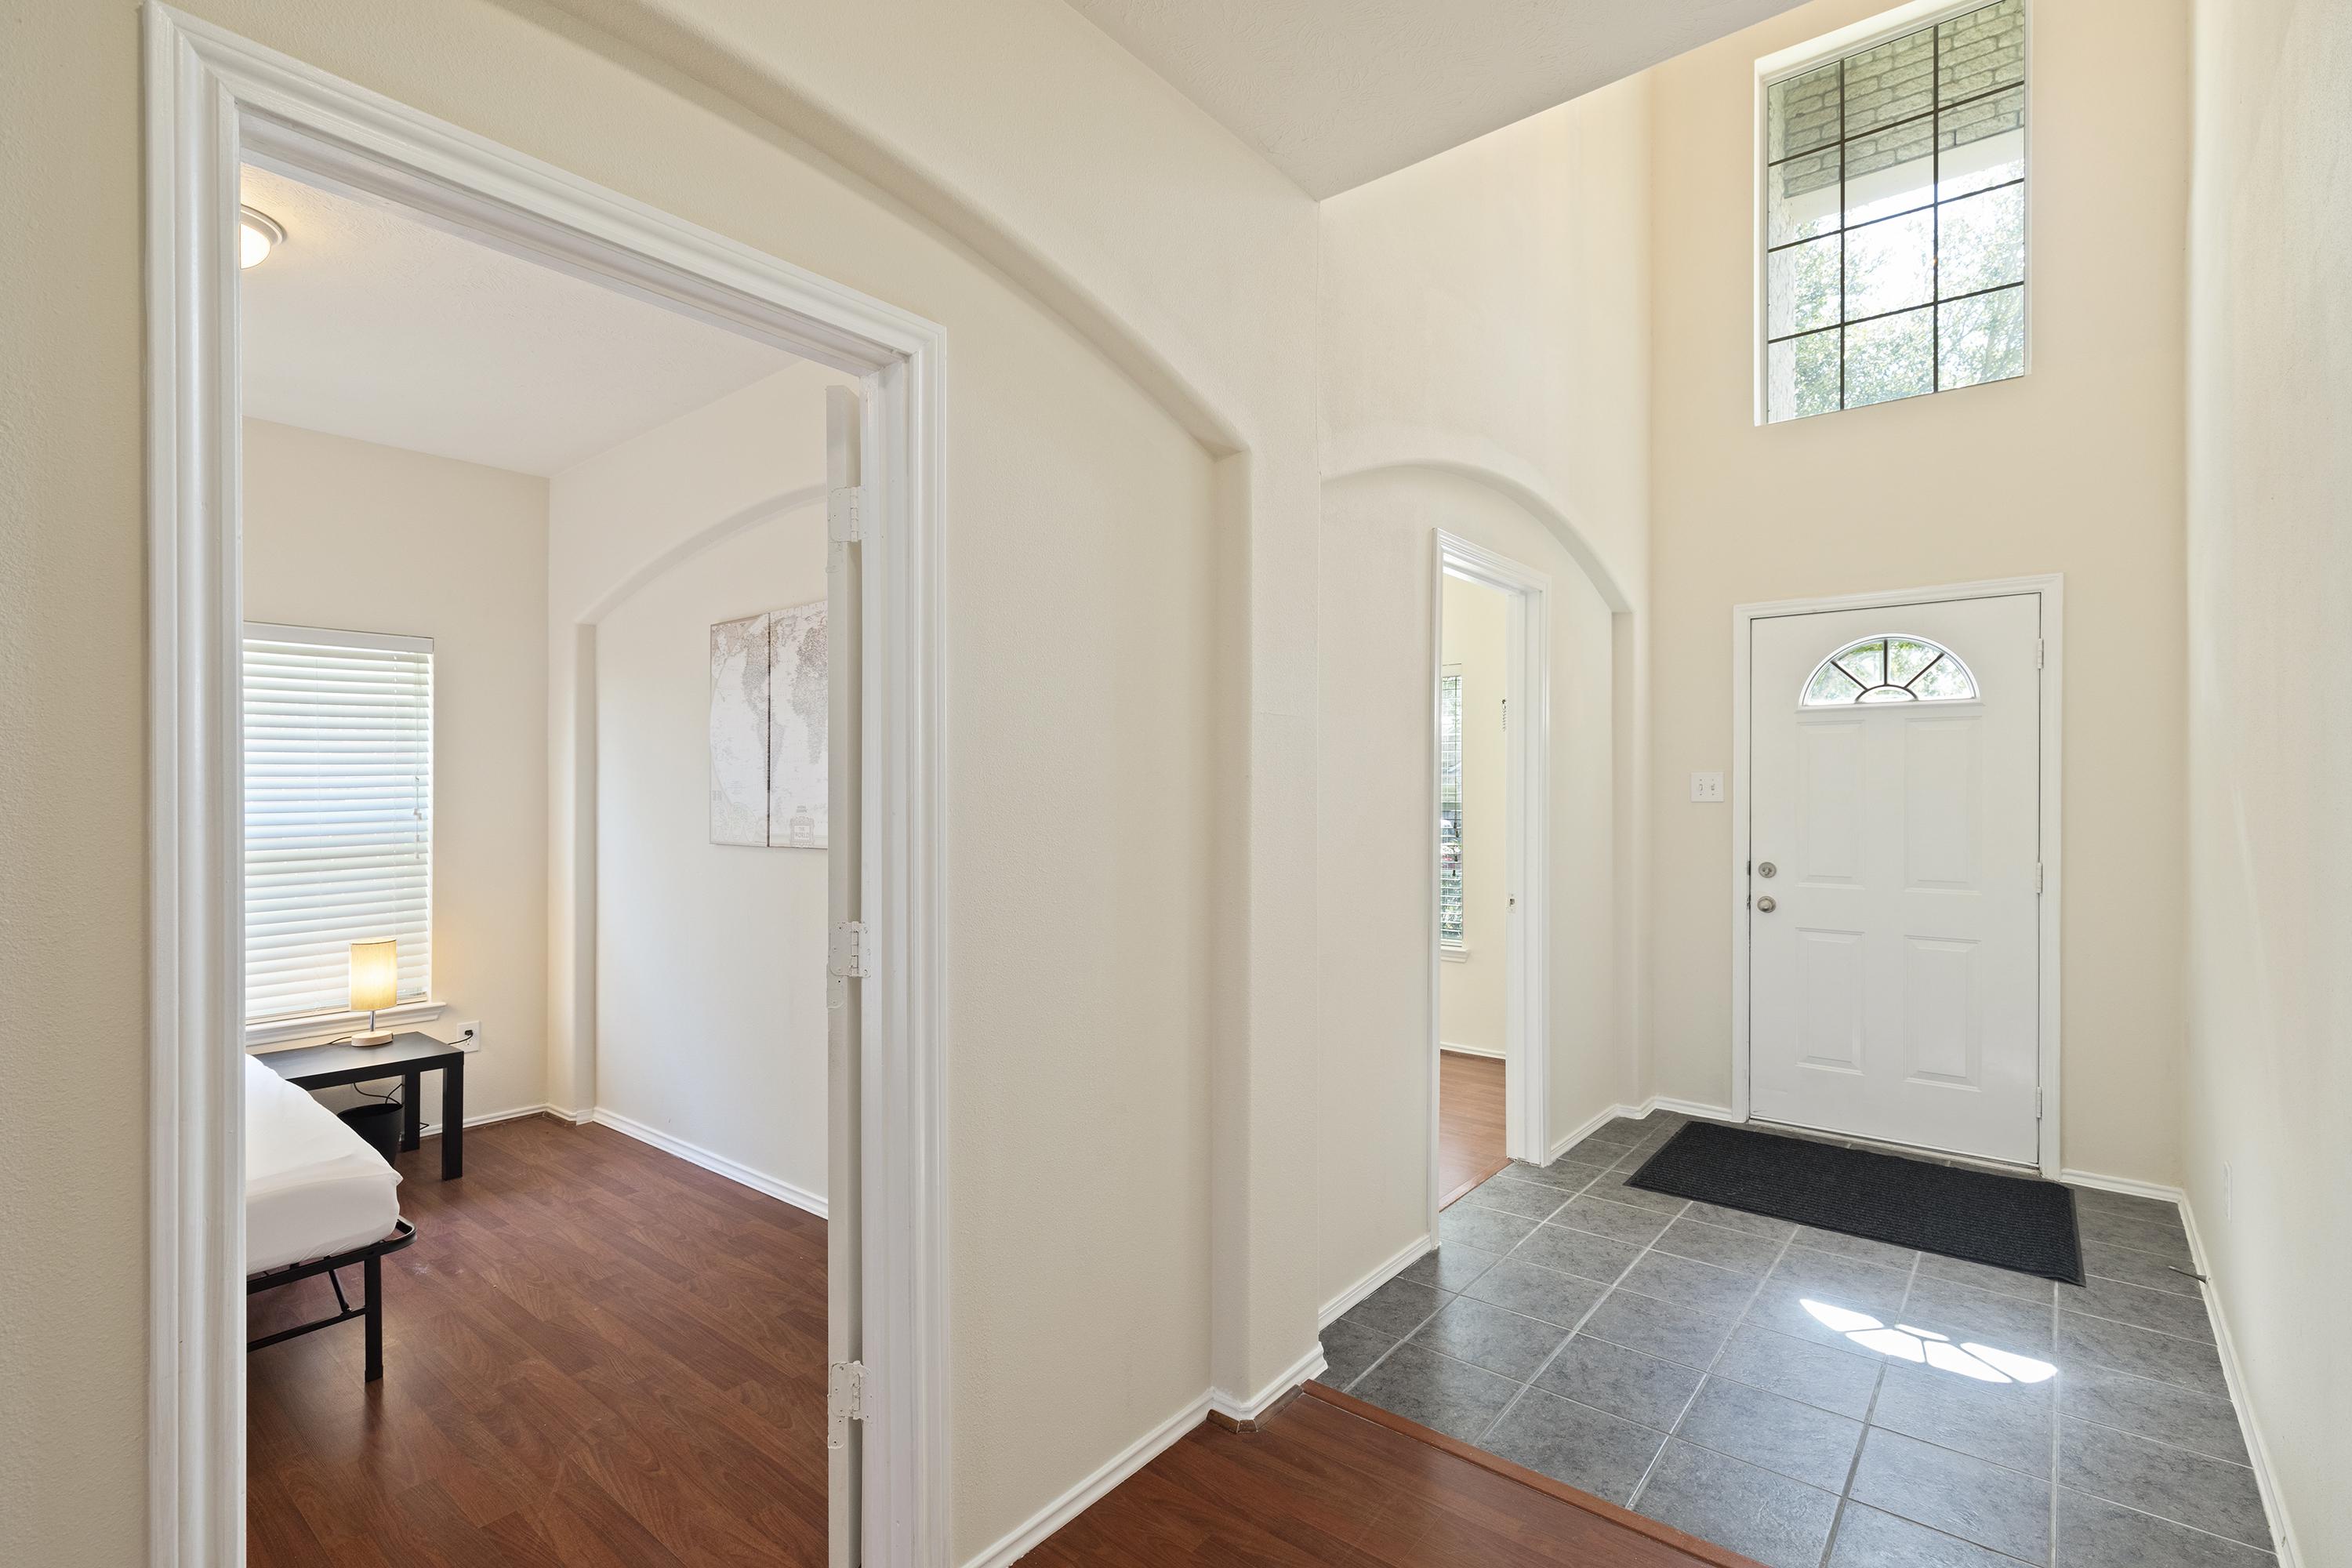 Lovingly known as "The Arches" this home packs a lot of character and charm!